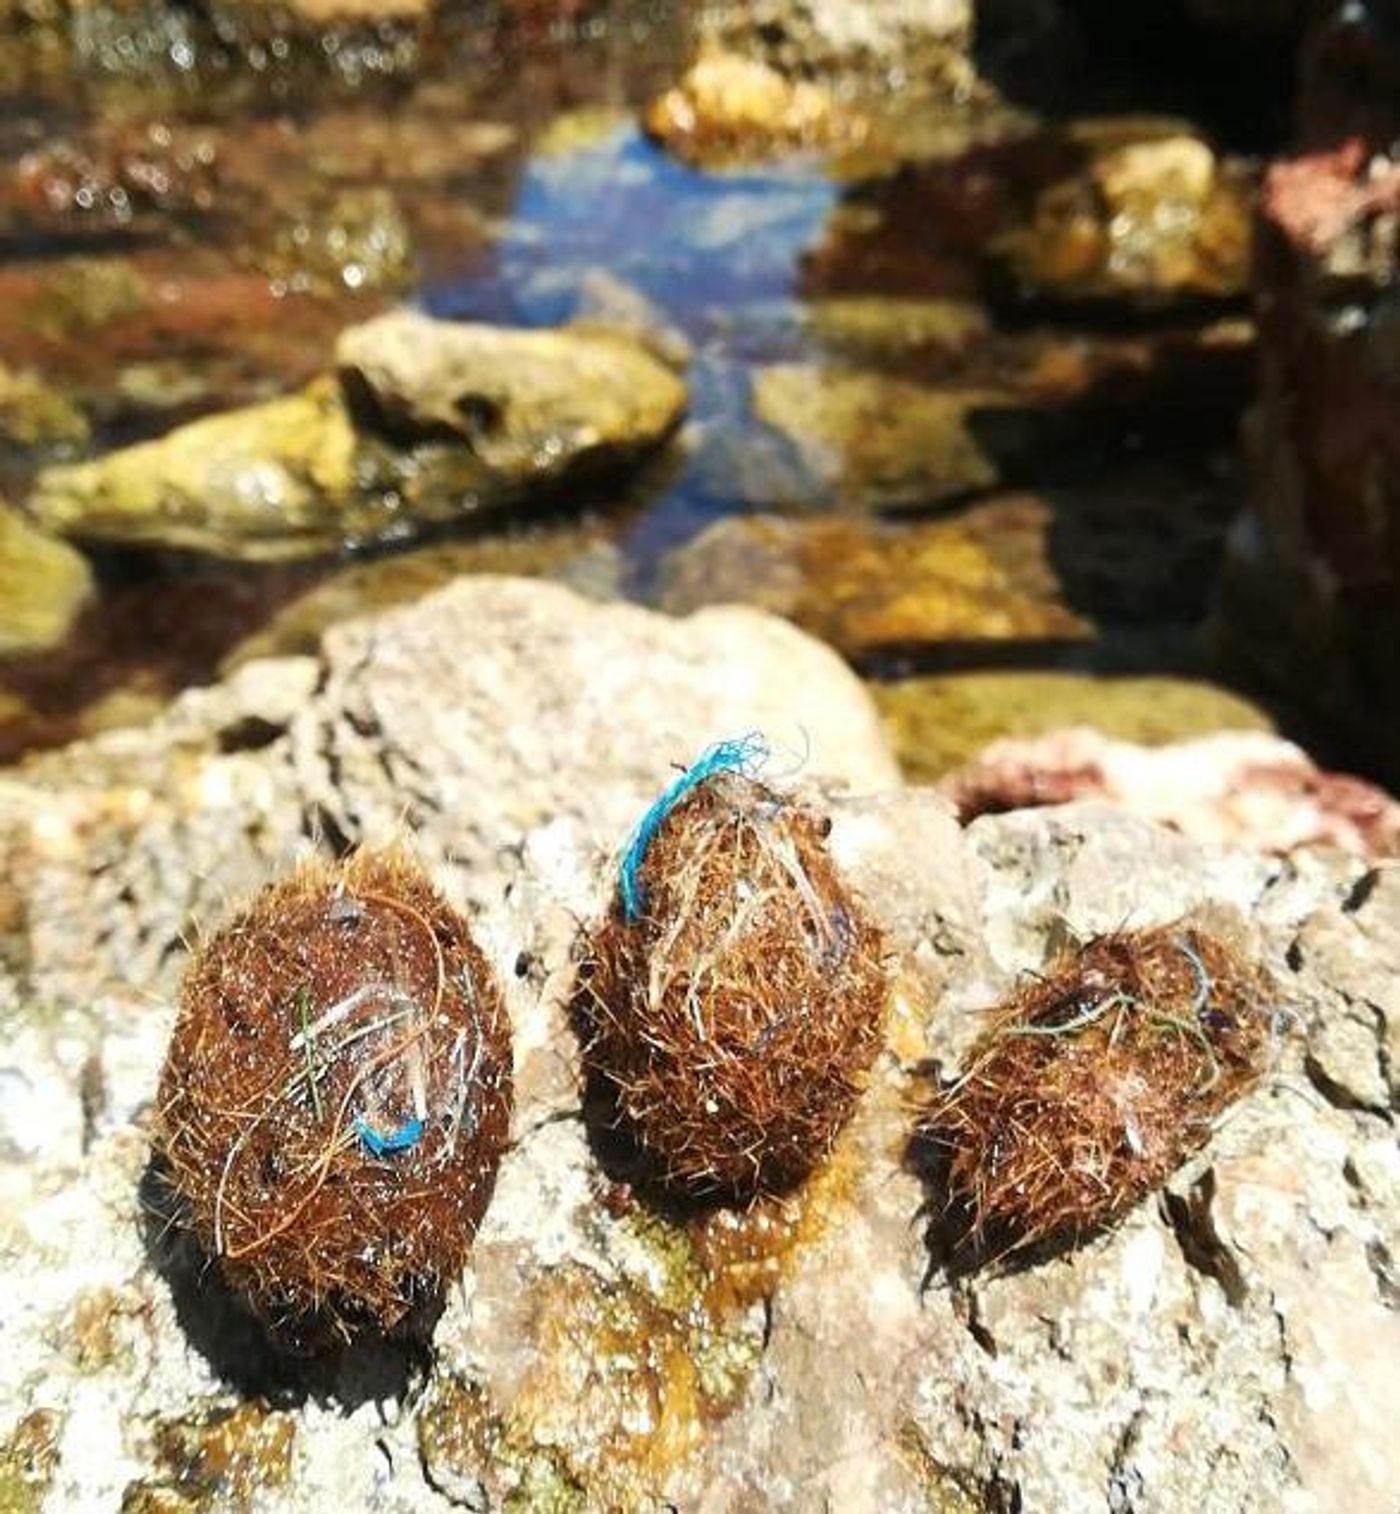 In the grasslands, the plastics are incorporated to agglomerates of natural fiber with a ball shape (aegagropila or Posidonia Neptune balls). Credit: University of Barcelona